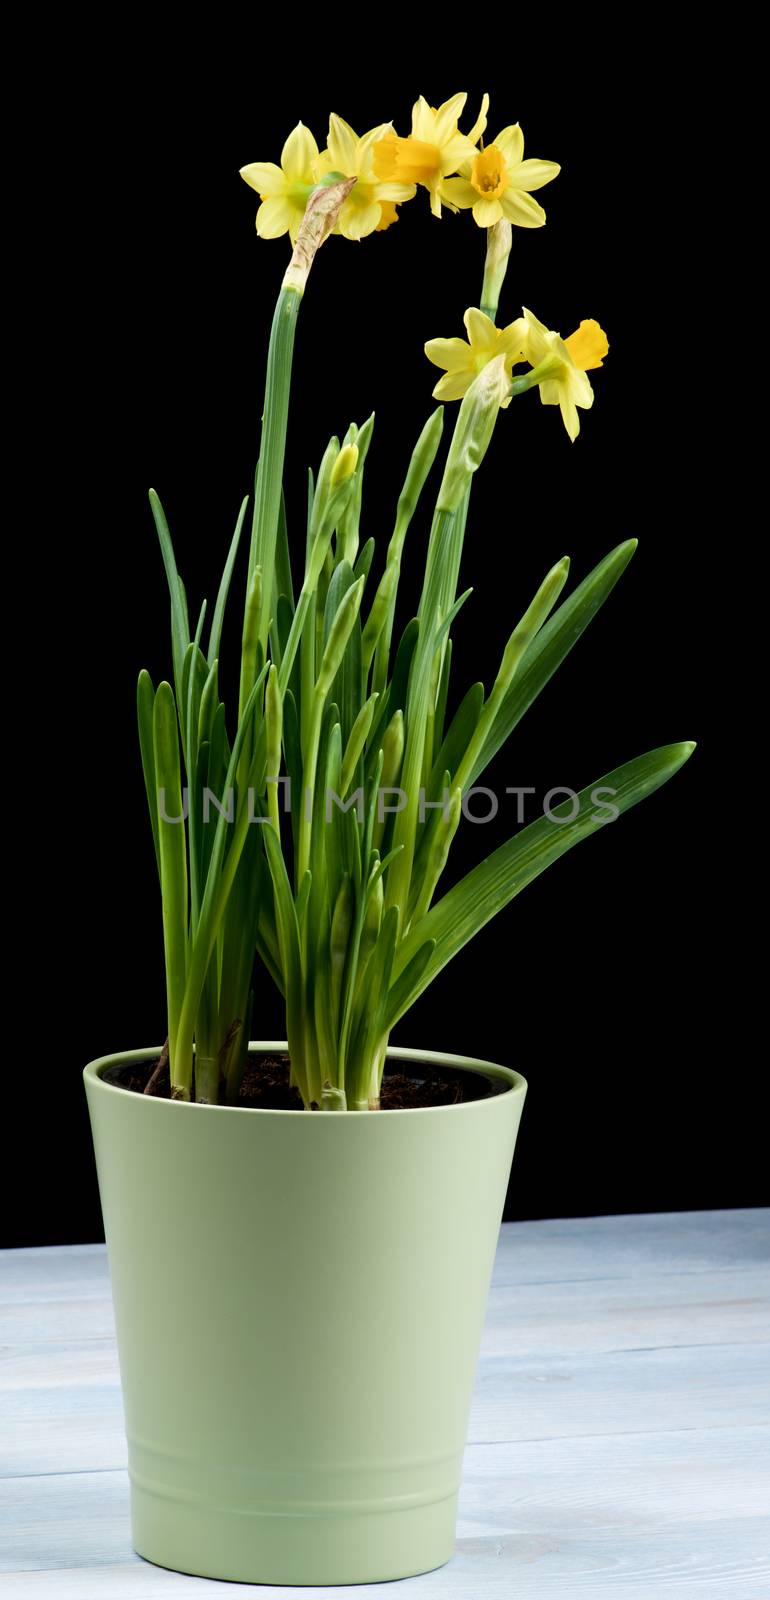 Bunch of Wild Yellow Daffodils with Buds in Green Flower Pot closeup Black and Blue Wooden background